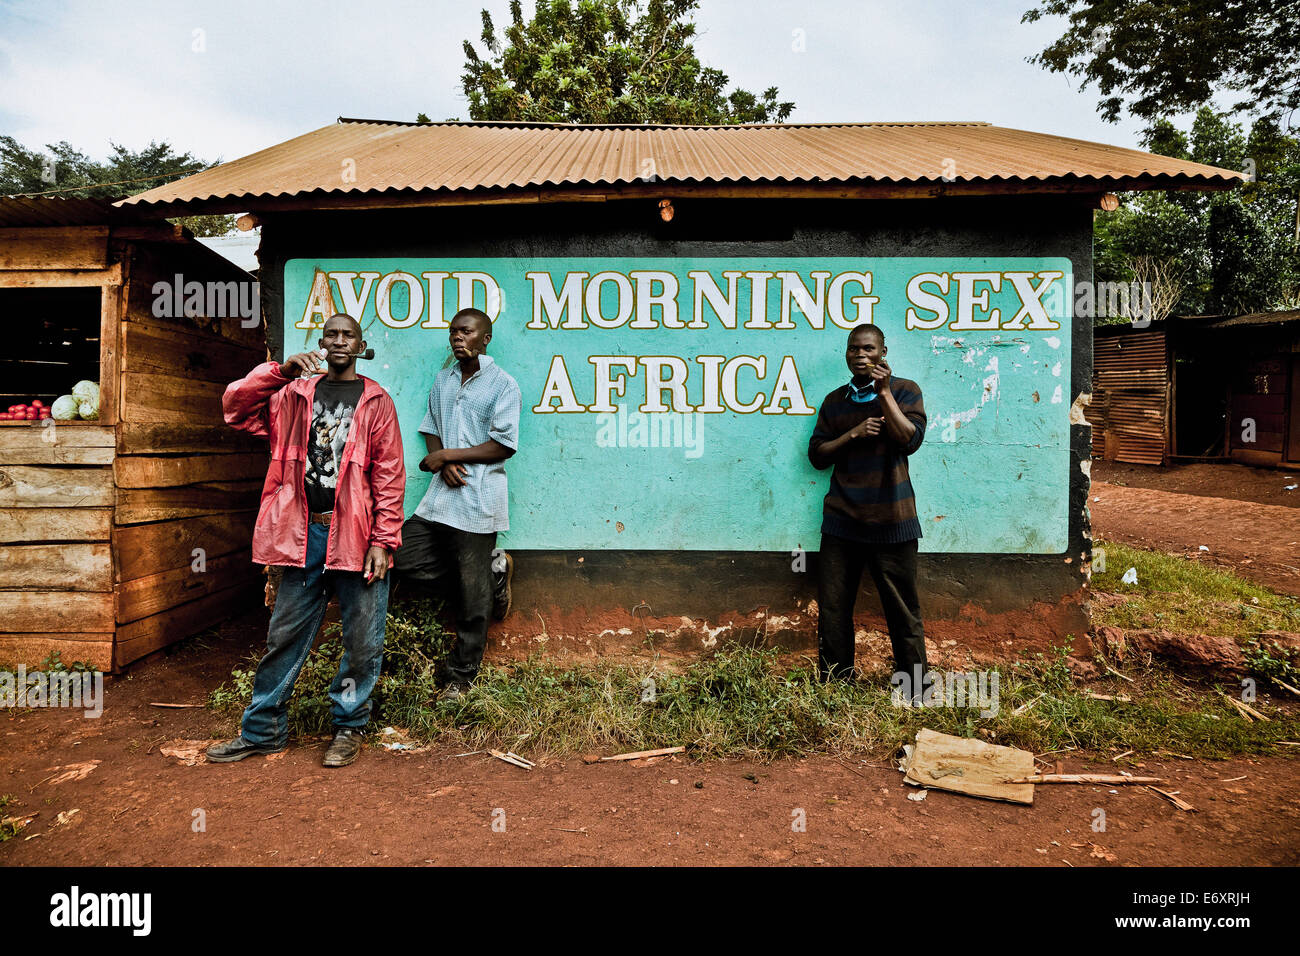 Three men smoking pipes in front of a hut with Anti-Aids campaign, Buwenda, Uganda, Africa Stock Photo